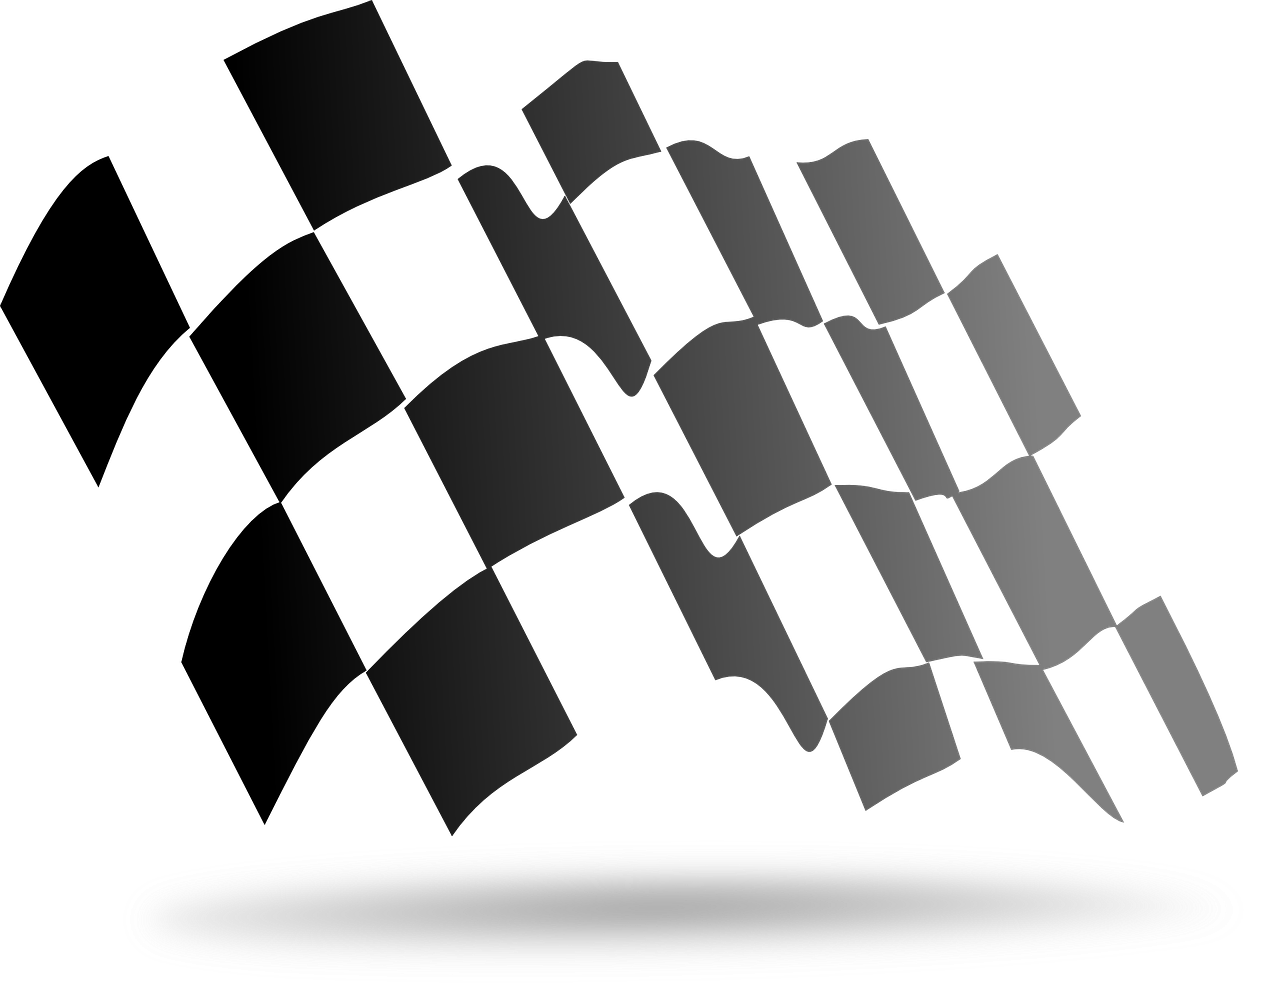 car,flag,win,speed,race,final,checker,lap,checkered,free vector graphics,free pictures, free photos, free images, royalty free, free illustrations, public domain